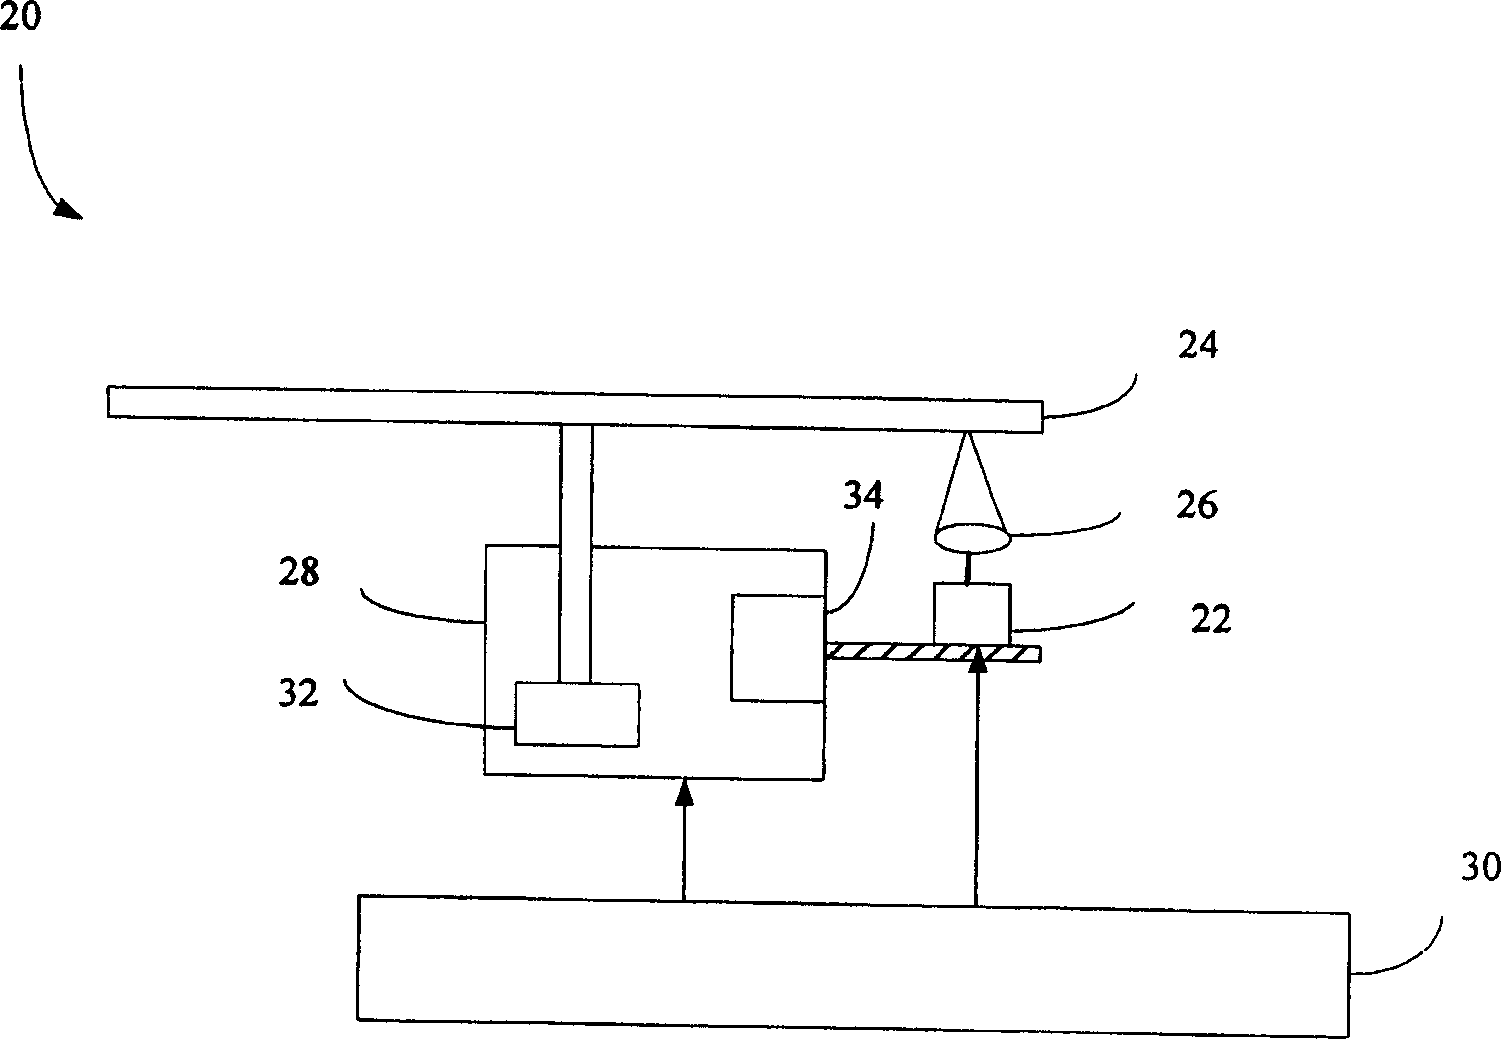 Information recording method and device thereof